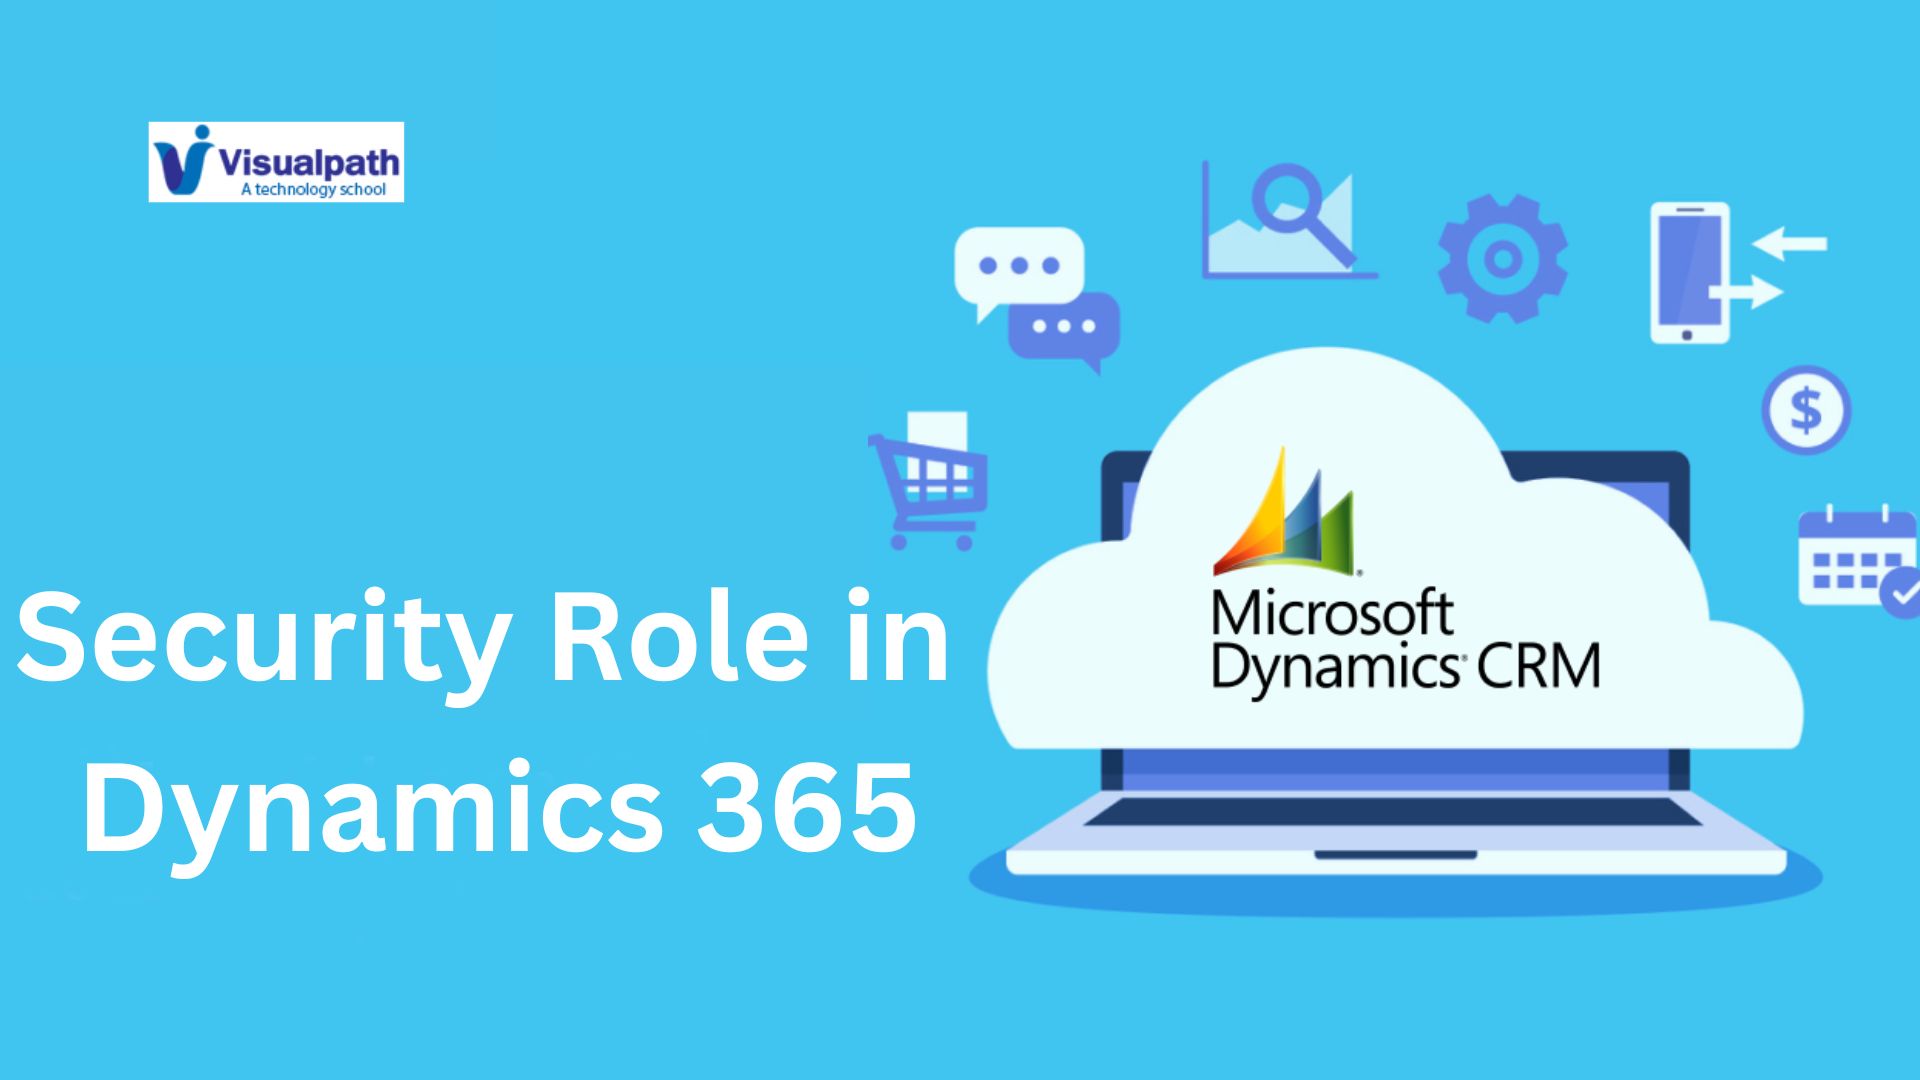 Understanding the Security Role in Dynamics 365